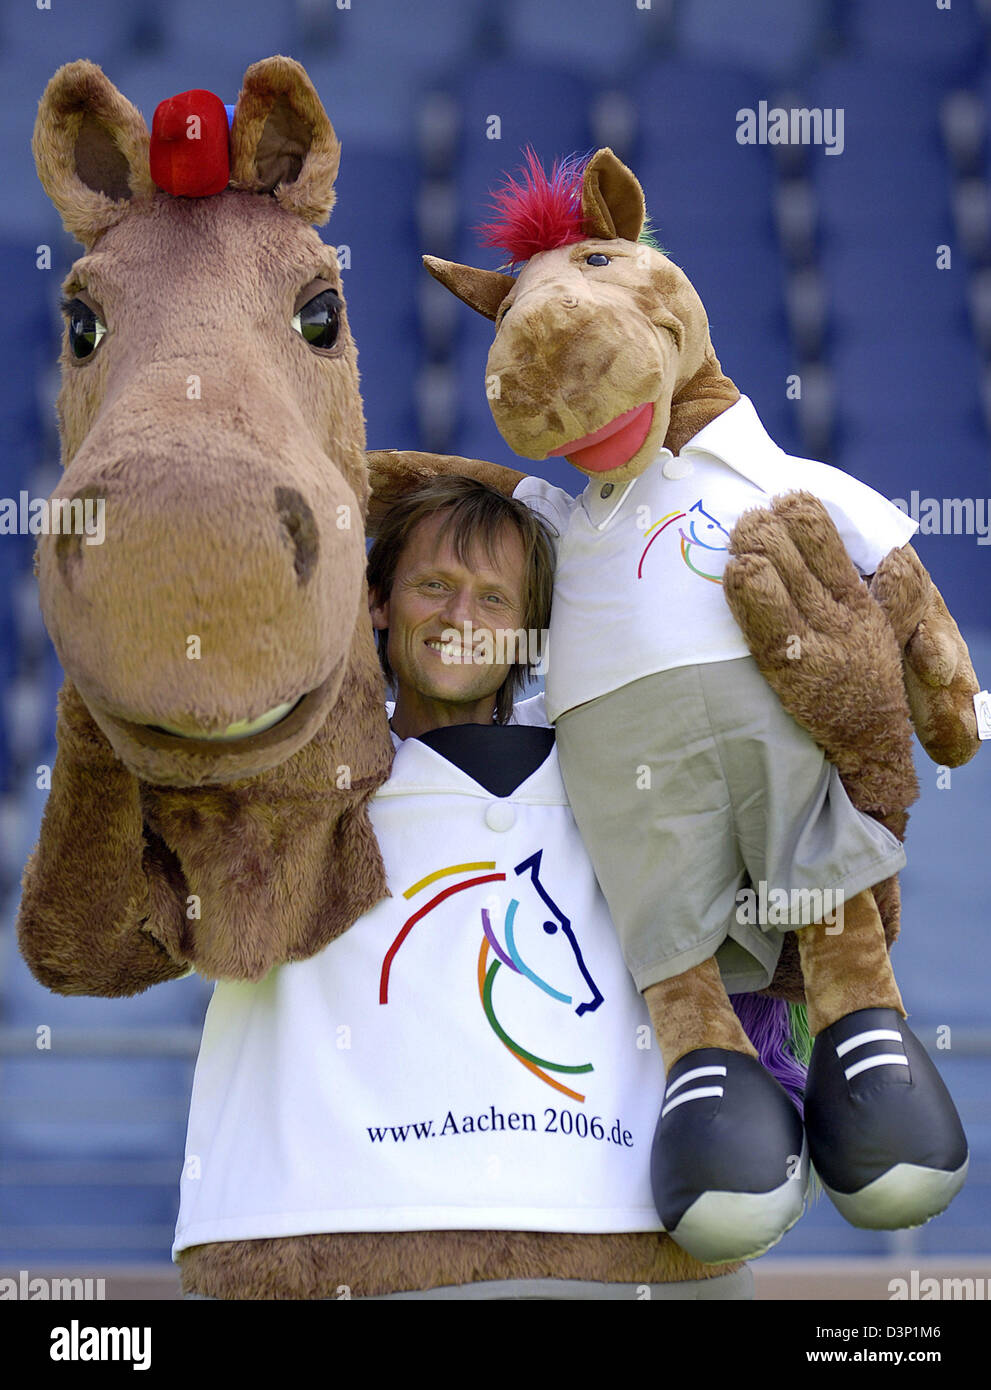 Impersonator Hans-Juergen van Almsick presents the official mascot of the 2006 World Equestrian Games horse 'Karli' in Aachen, Germany, Friday, 21 July 2006. Photo: Uwe Anspach Stock Photo